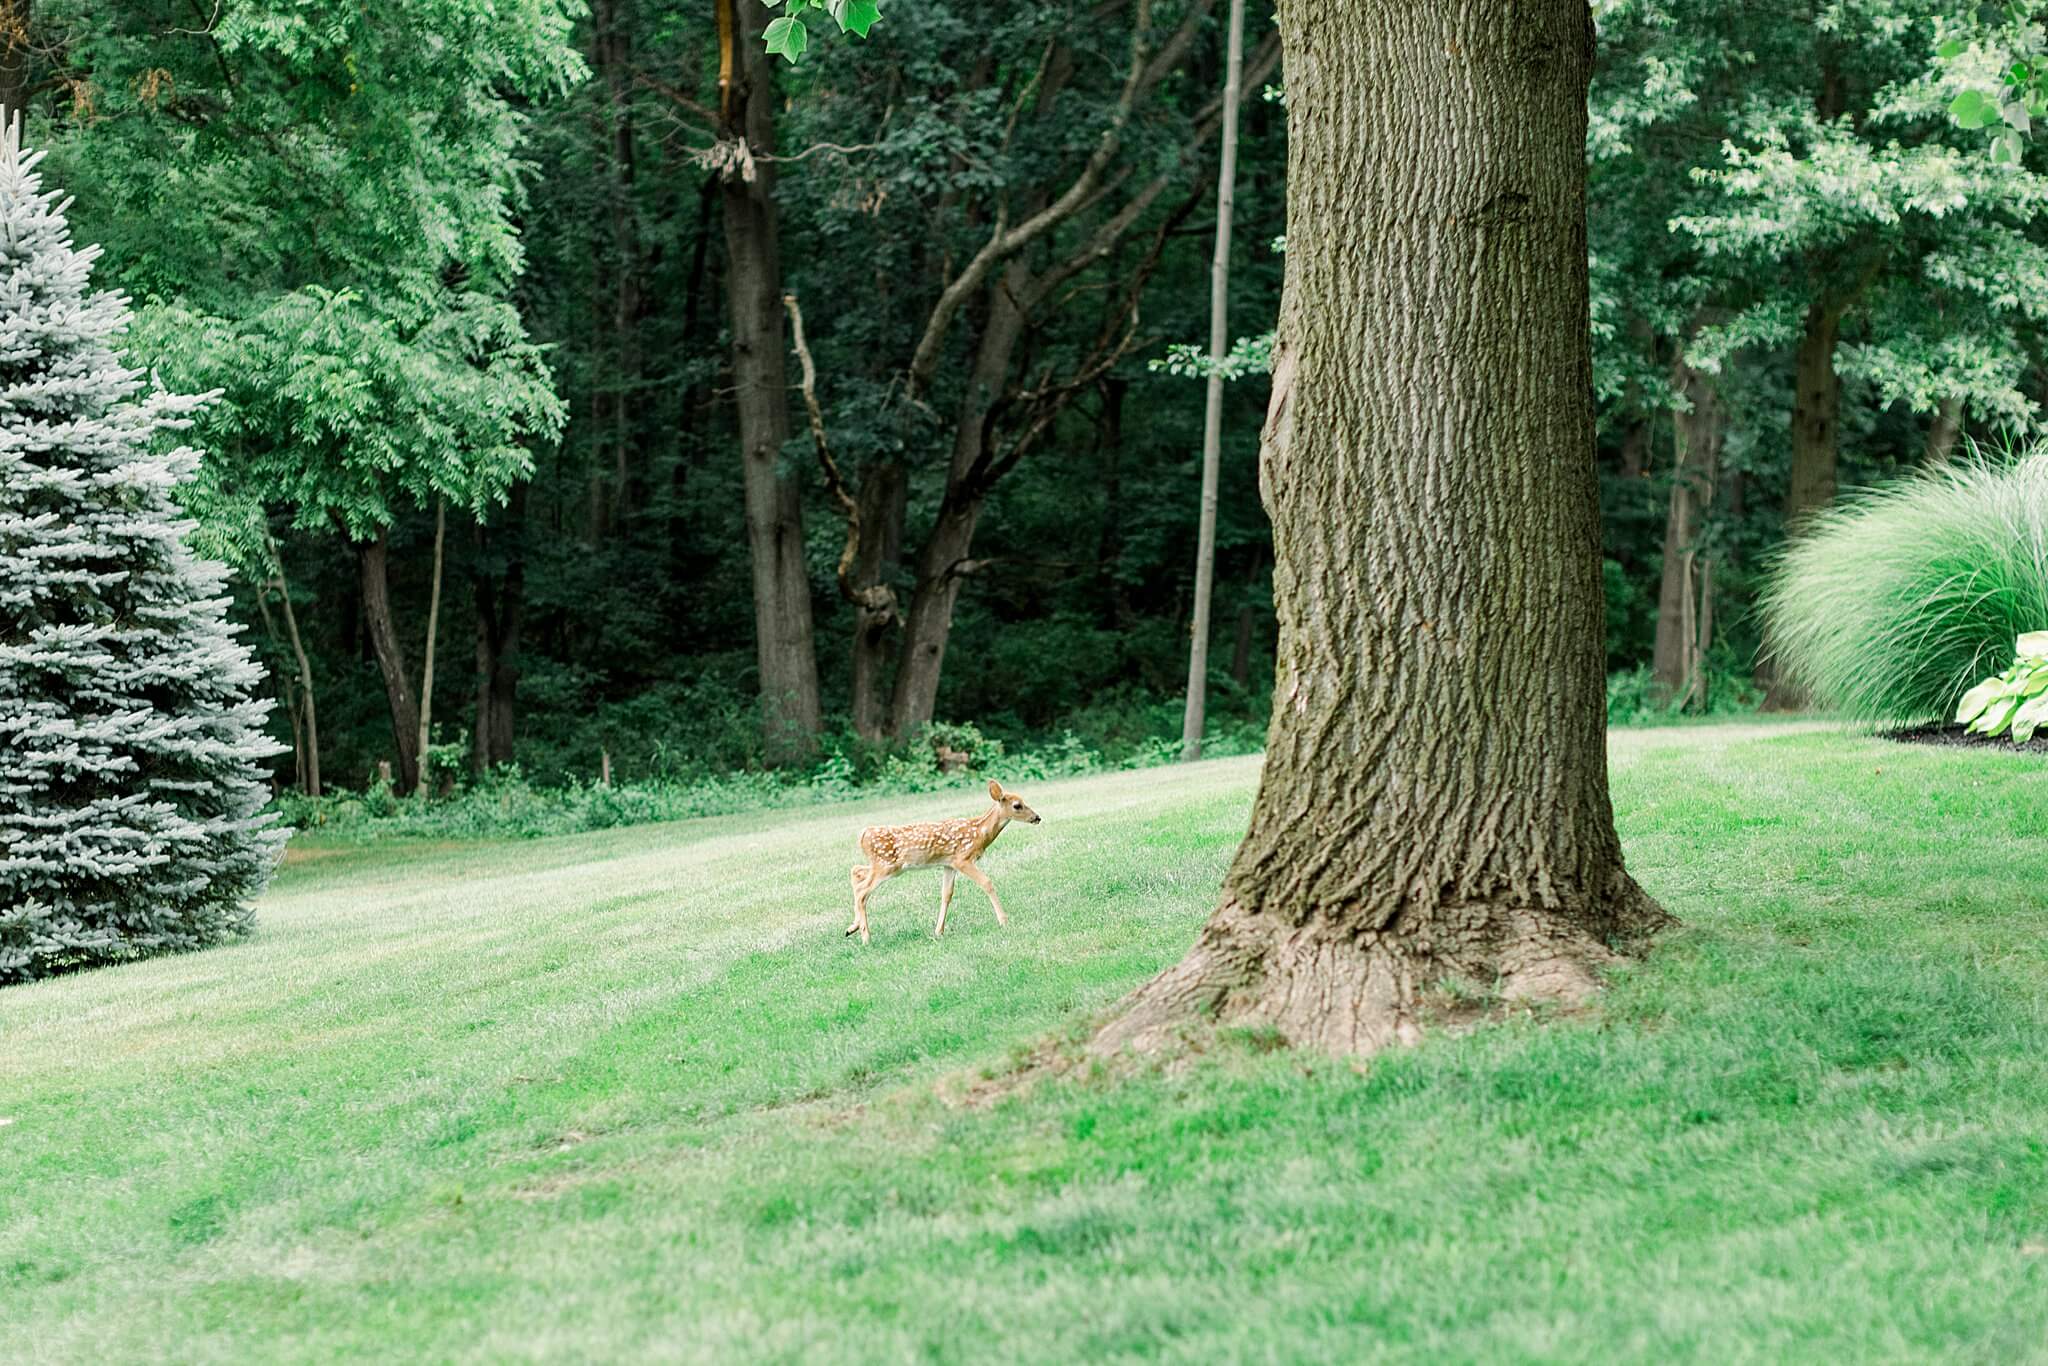 Baby deer makes surprise appearance during summer backyard wedding in Northern Michigan.